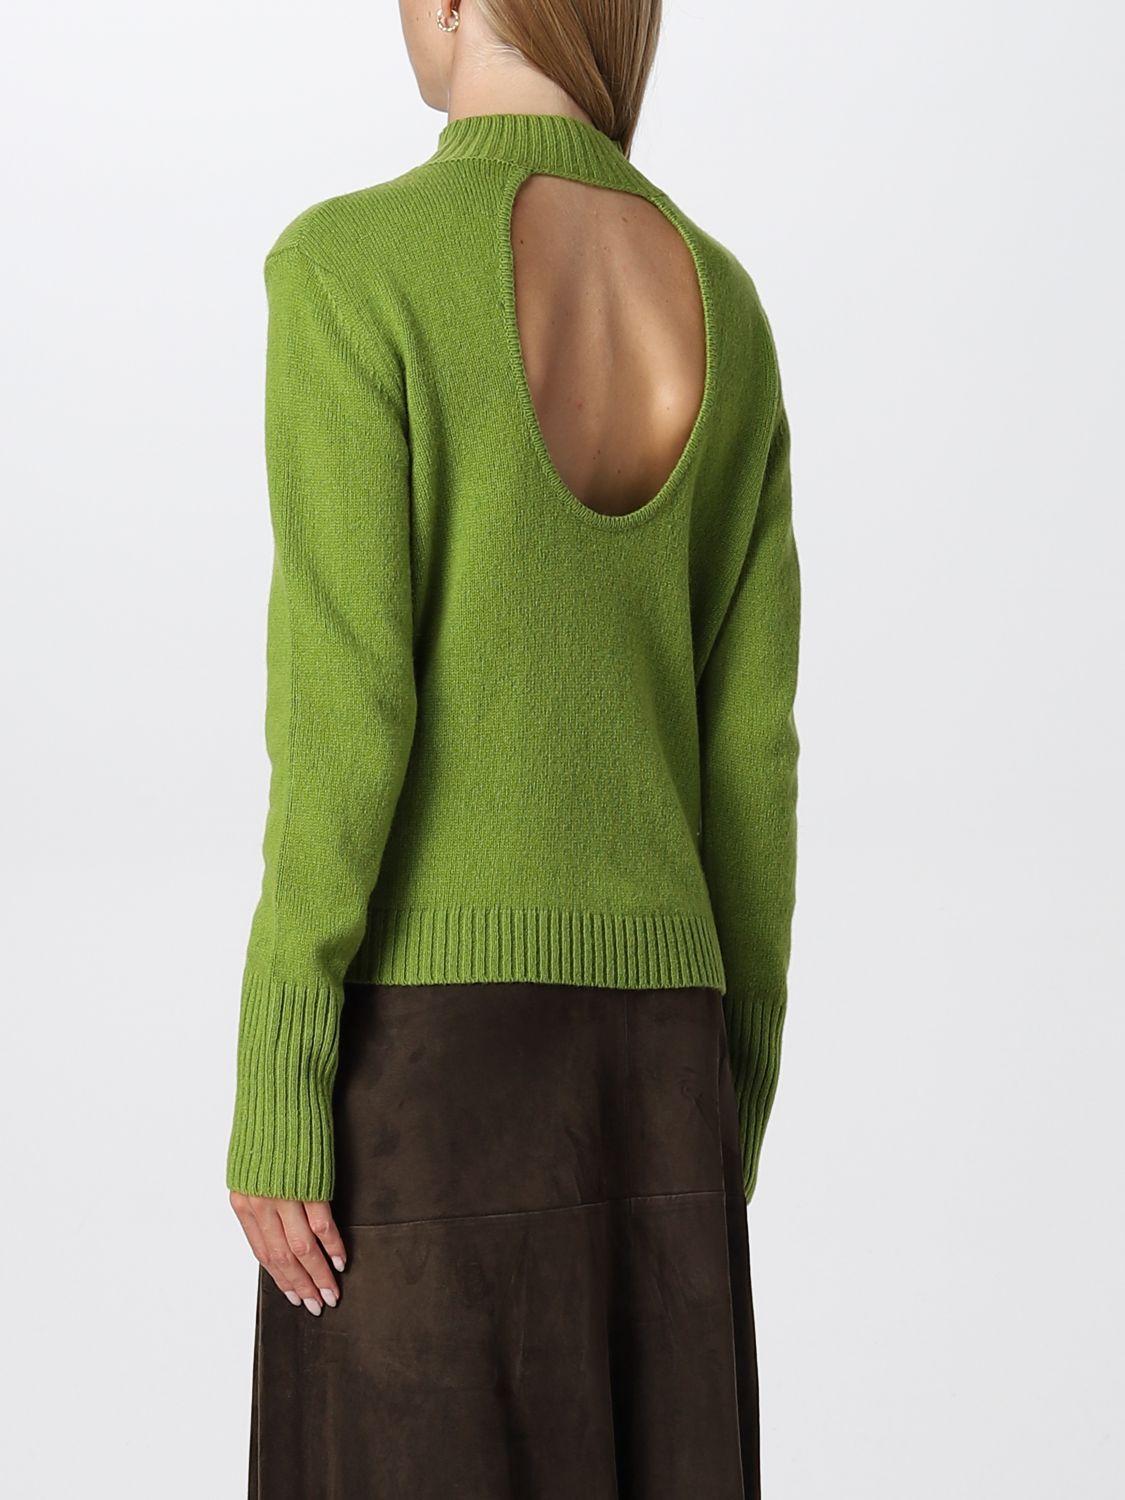 Womens Clothing Jumpers and knitwear Turtlenecks FEDERICA TOSI Wool Turtleneck Sweater in Green 